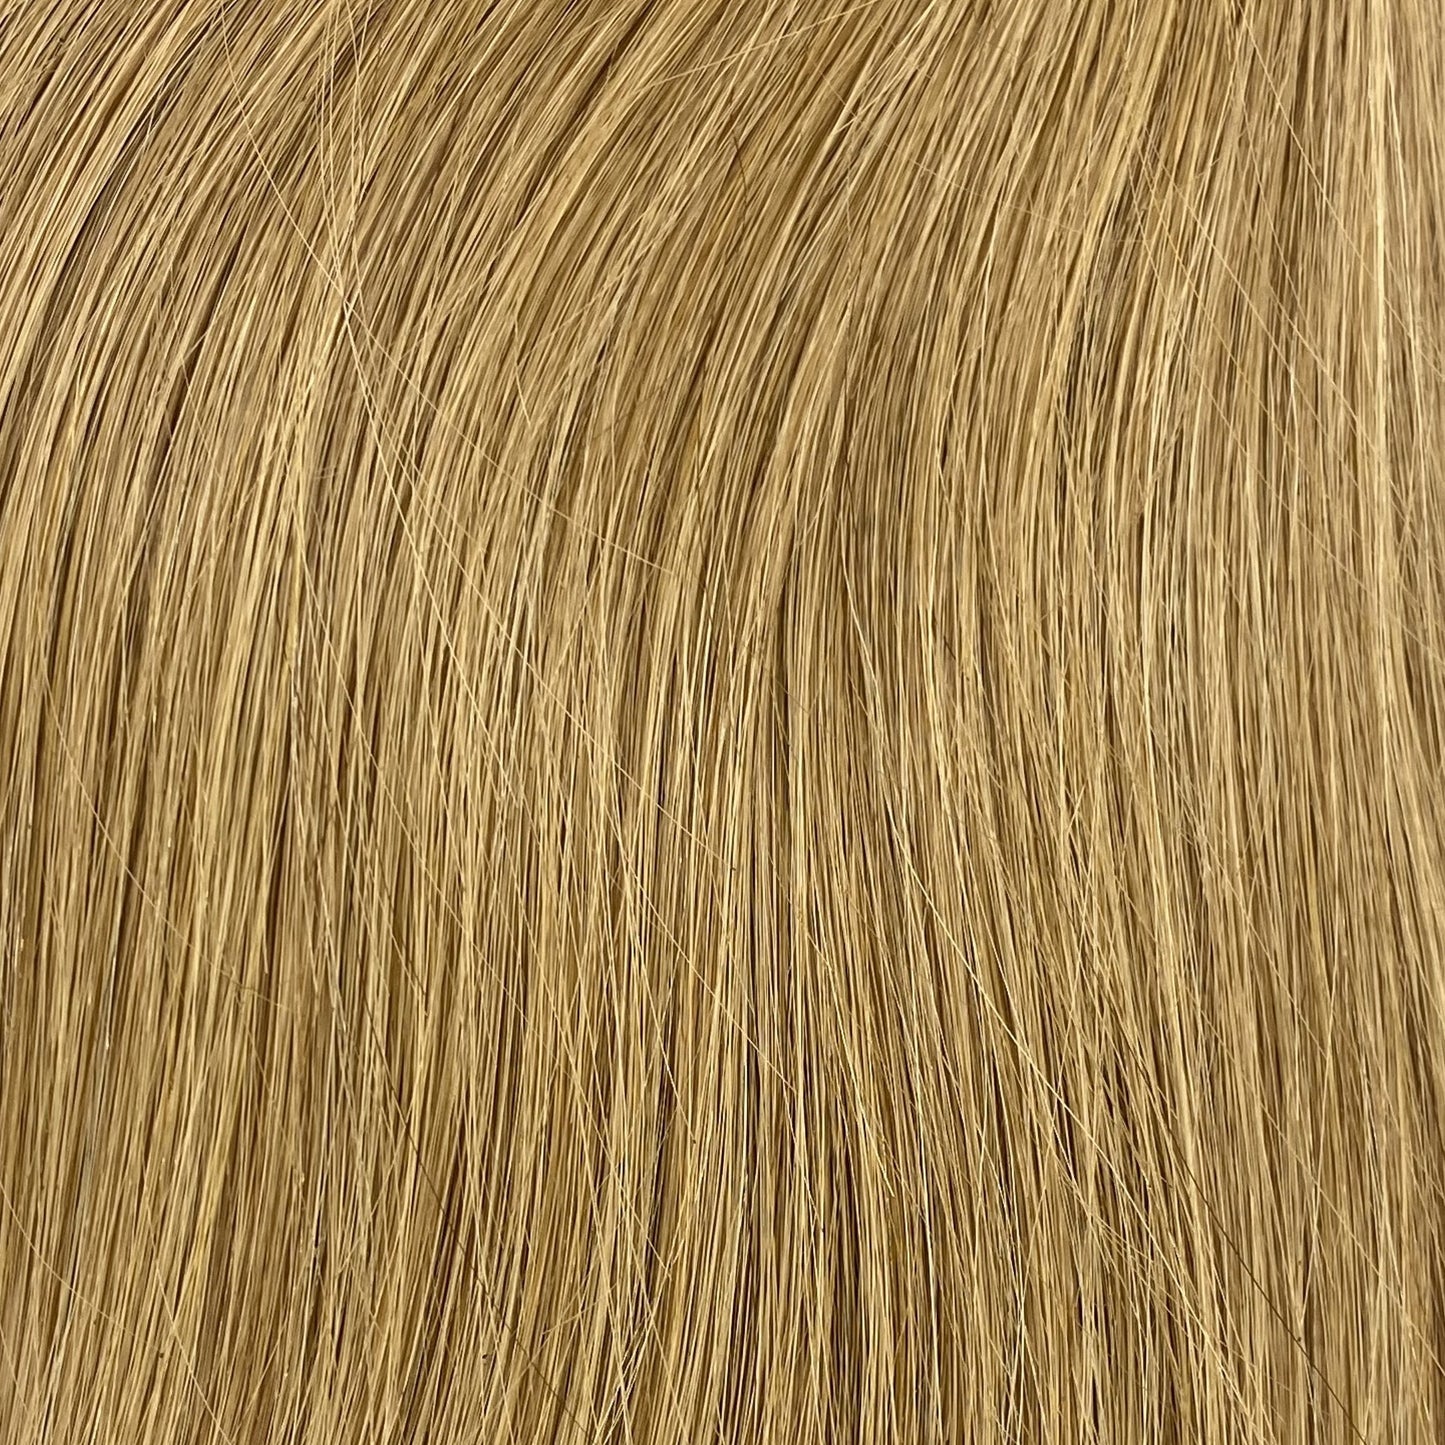 Velo #12 - 20 inches - Dark Golden Blonde Velo DR Hair Products Co 